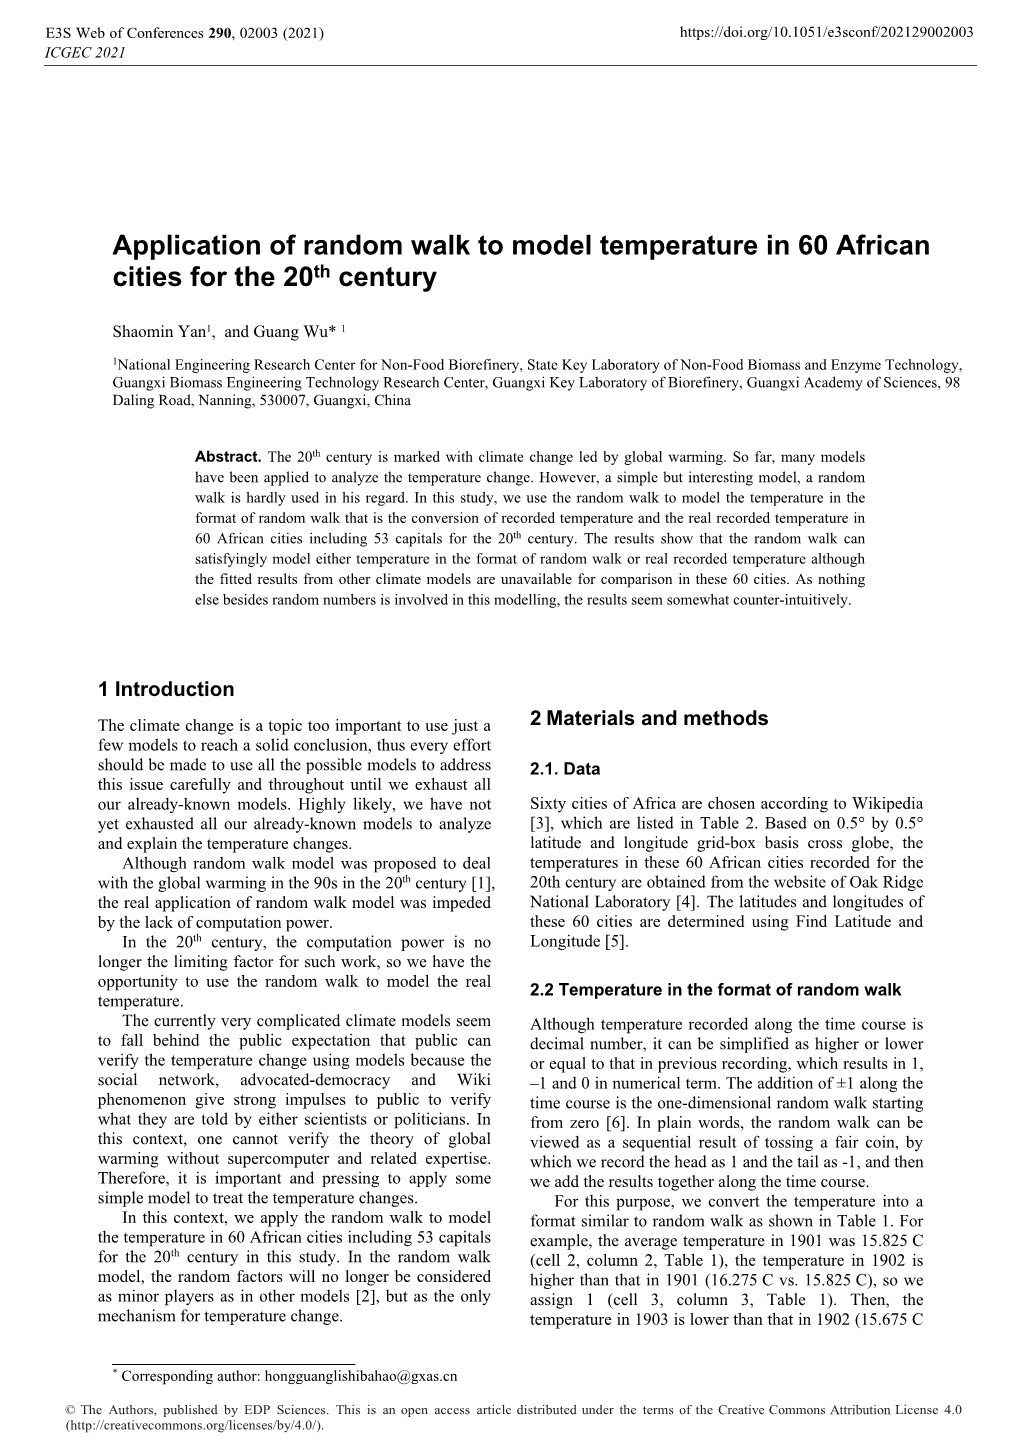 Application of Random Walk to Model Temperature in 60 African Cities for the 20Th Century